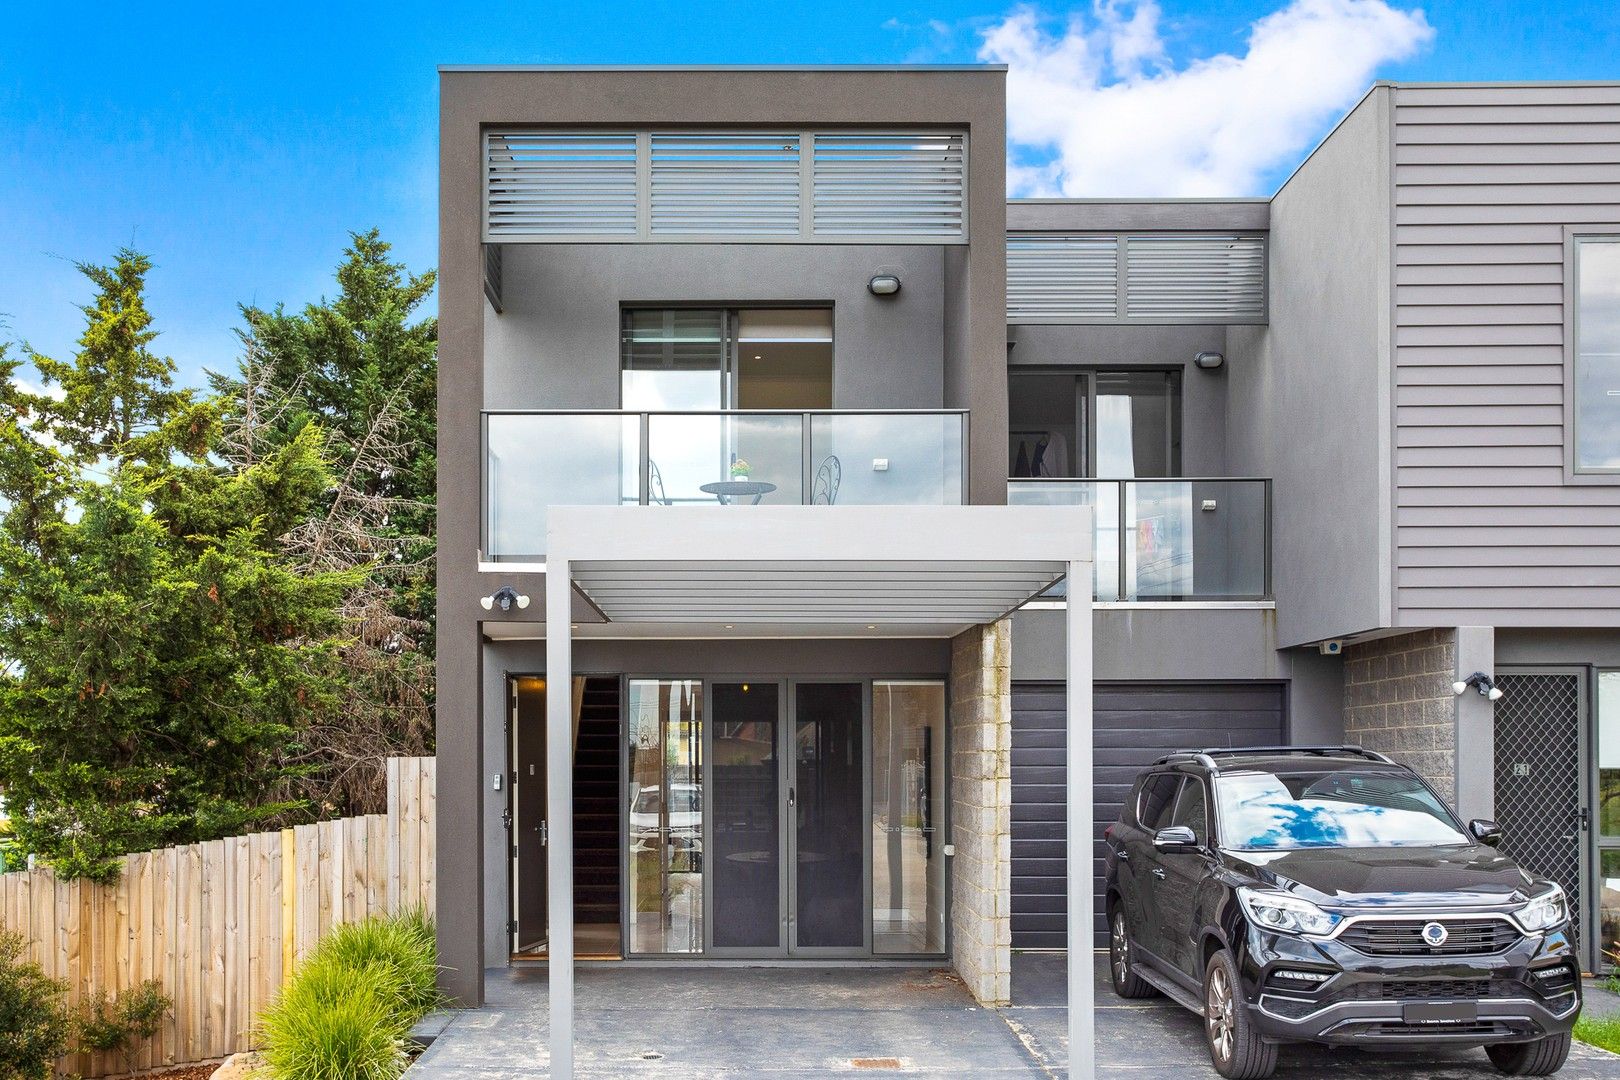 2 bedrooms Townhouse in 19 Bailey Crescent OAK PARK VIC, 3046